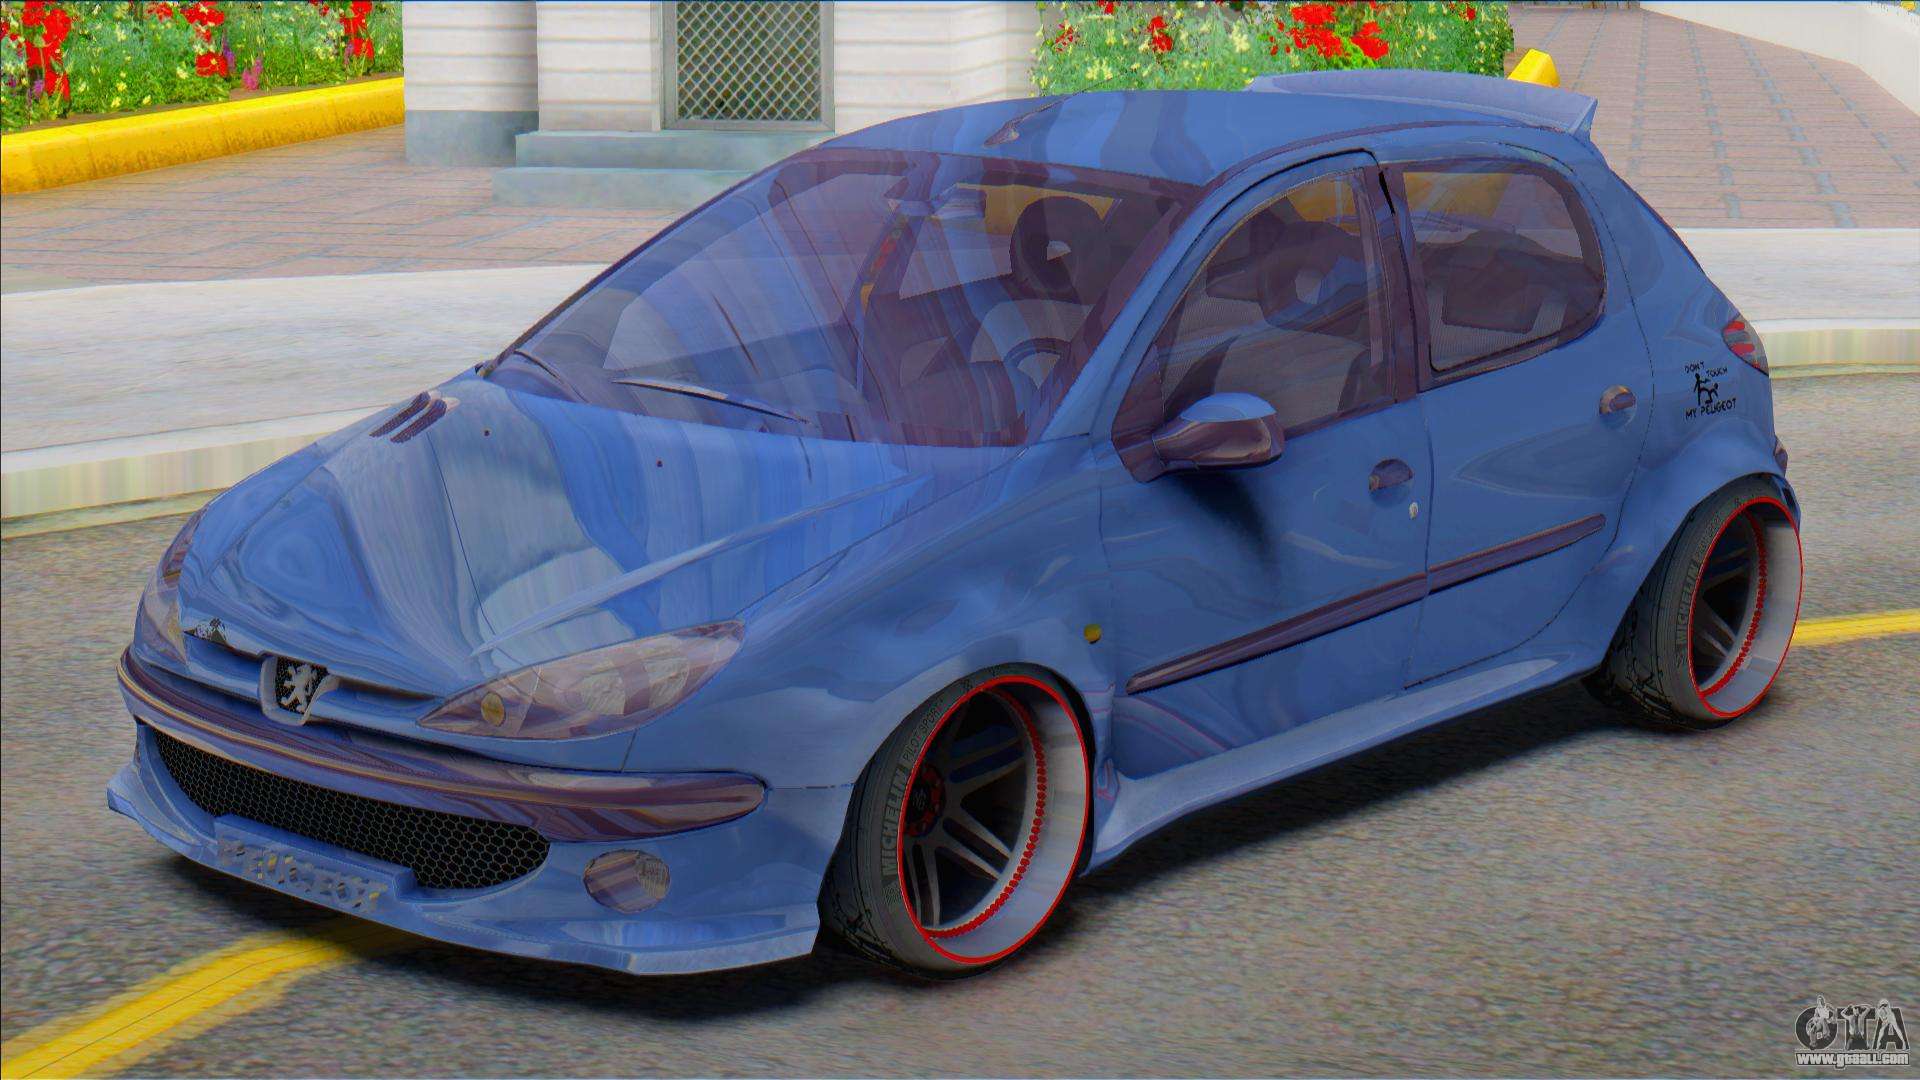 PEUGEOT 206 showwagen-tuning Used - the parking